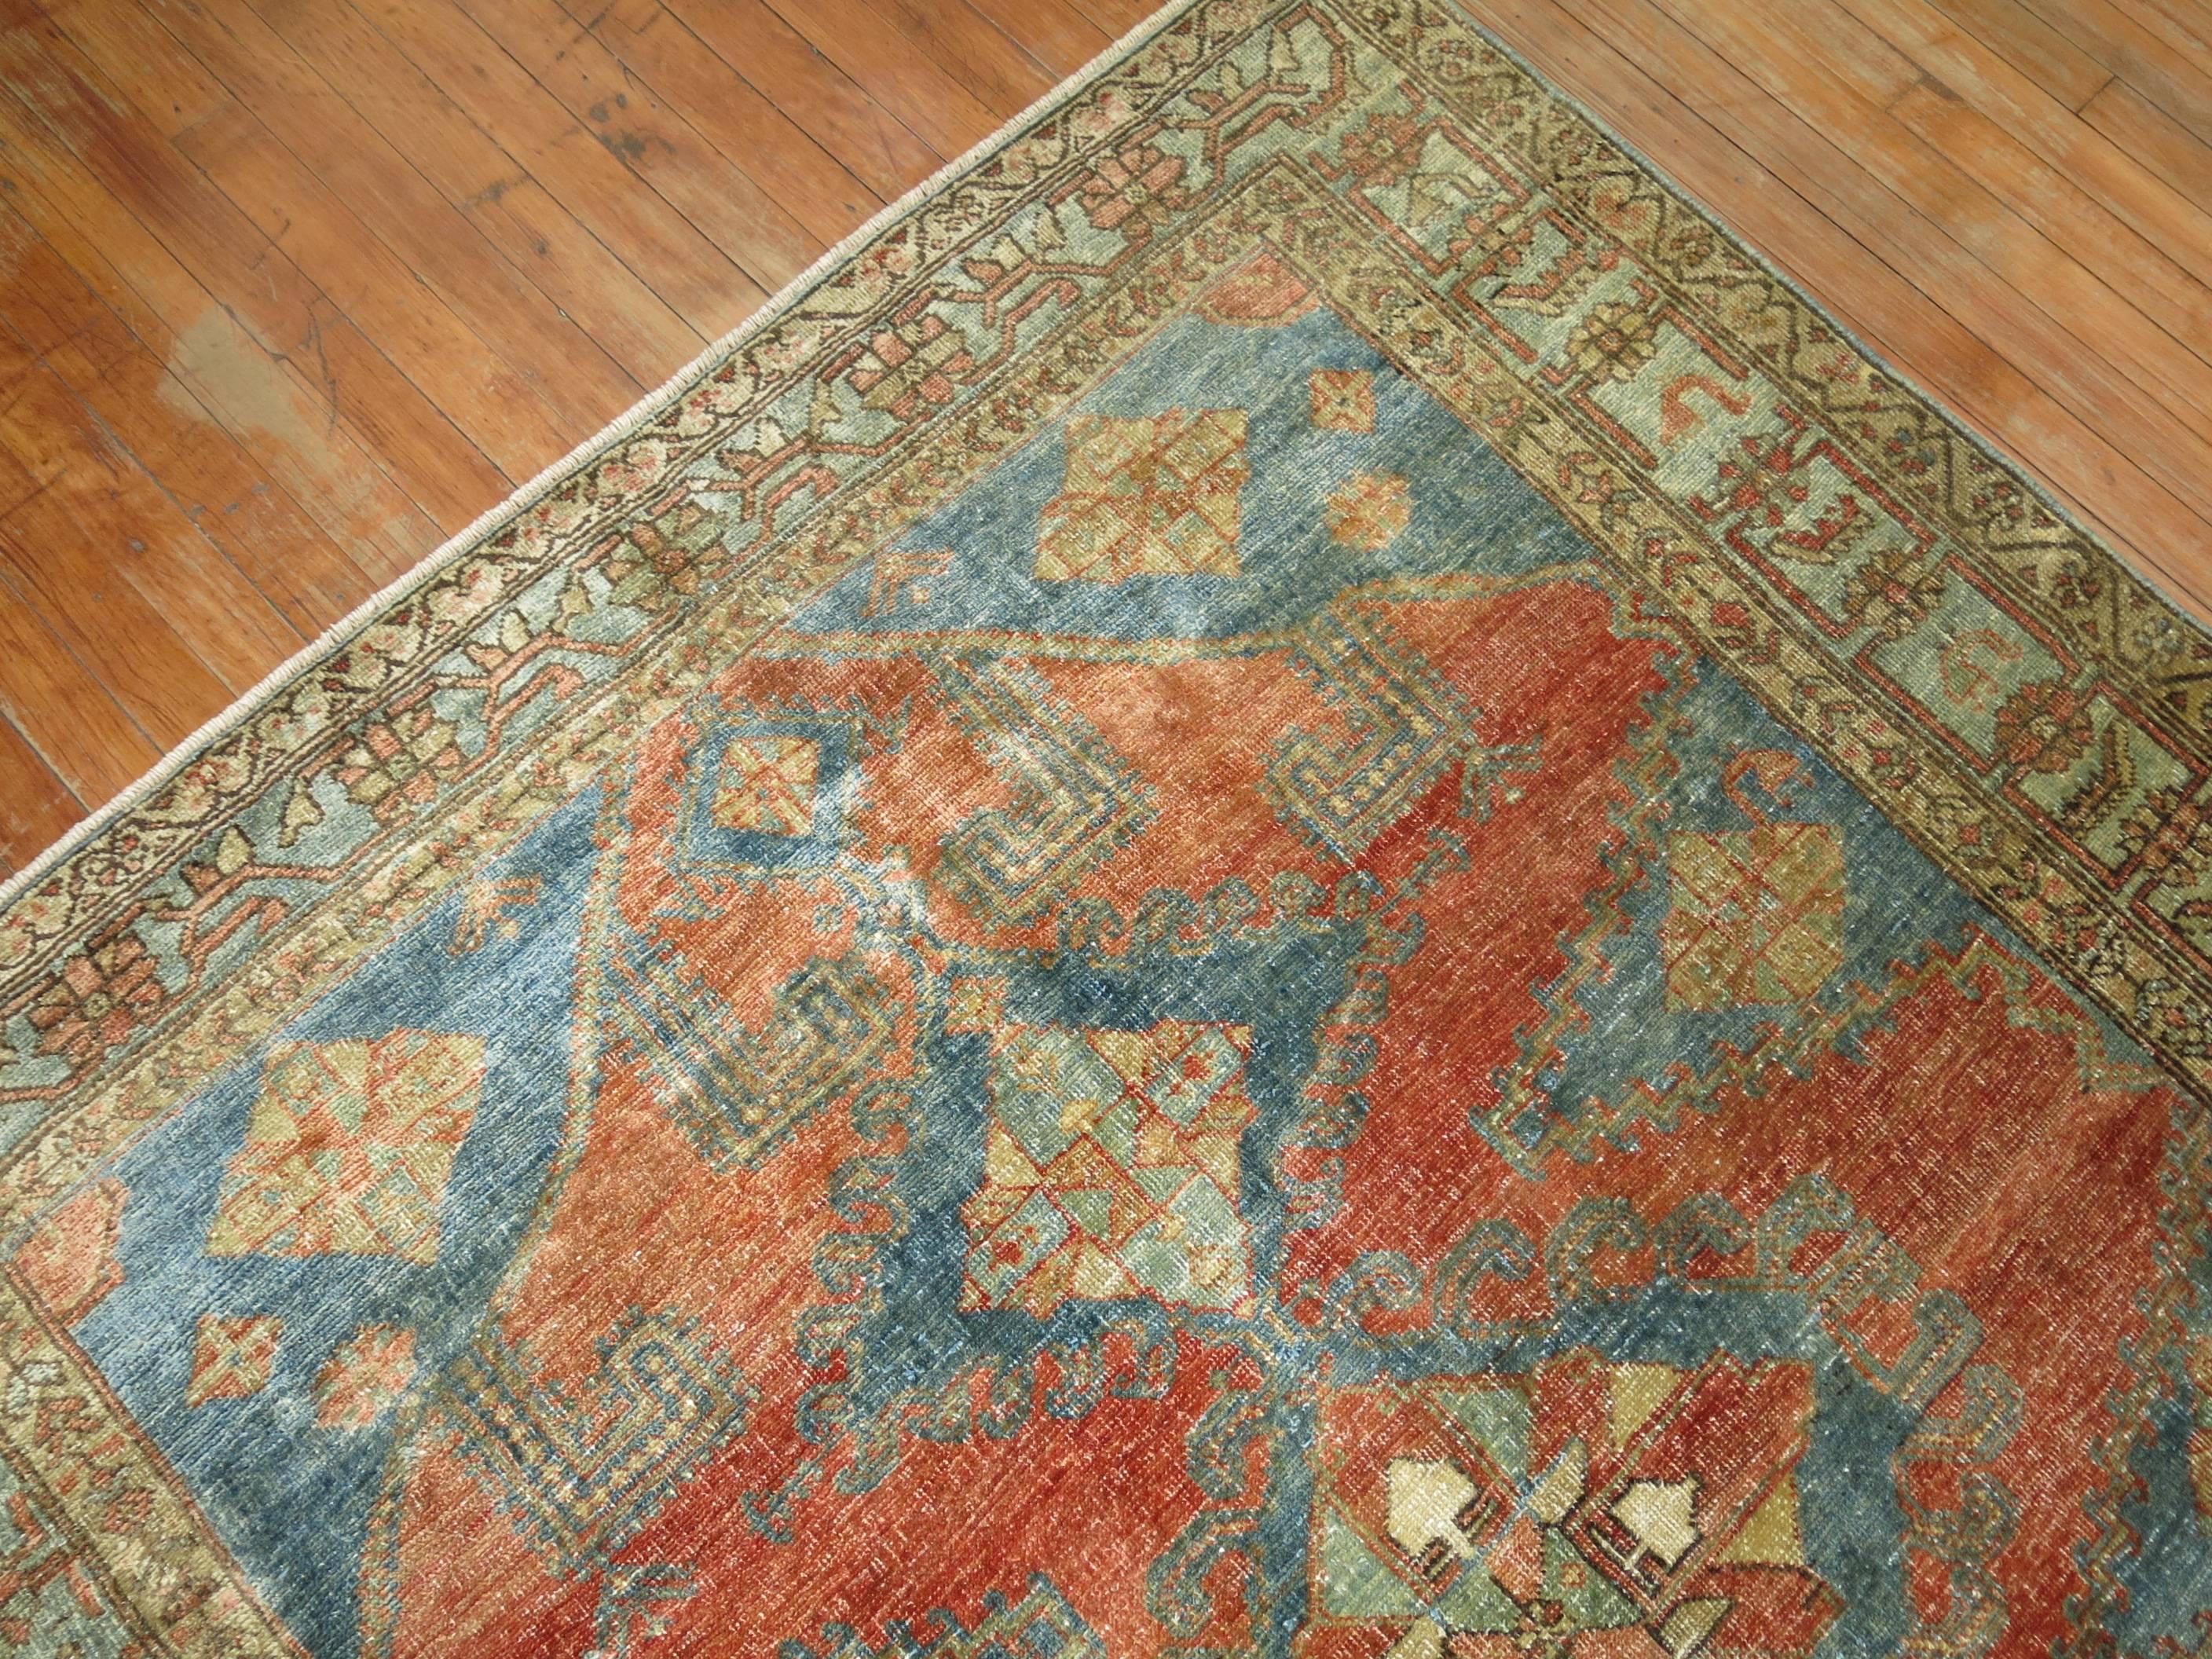 Squarish size one of a kind antique Persian Malayer rug in orangey red tones and soft blue.